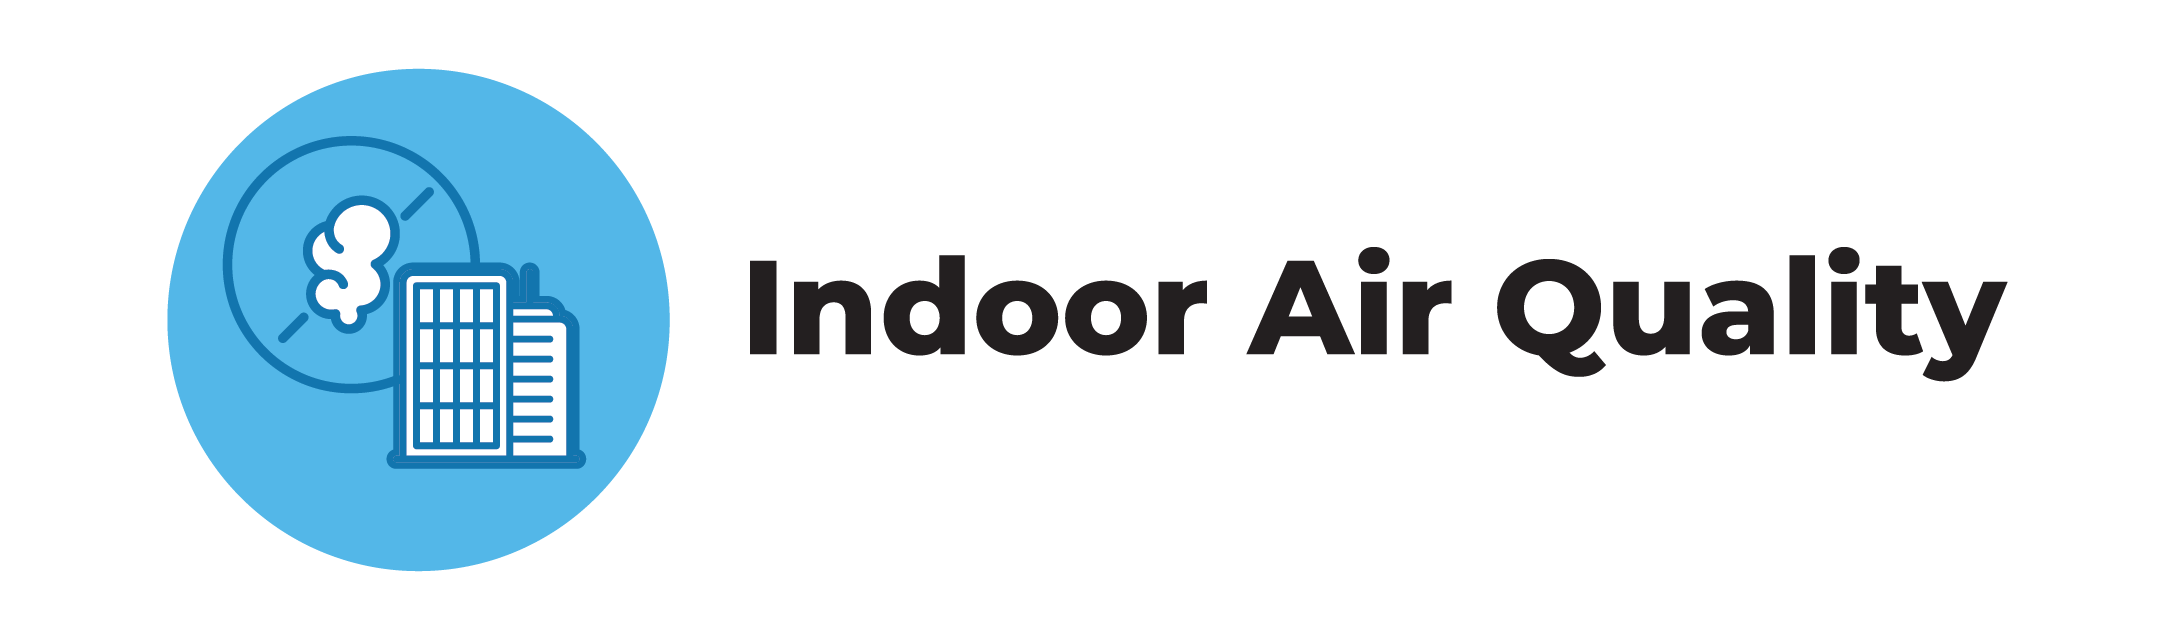 OSI_ICON_Indoor Air Quality